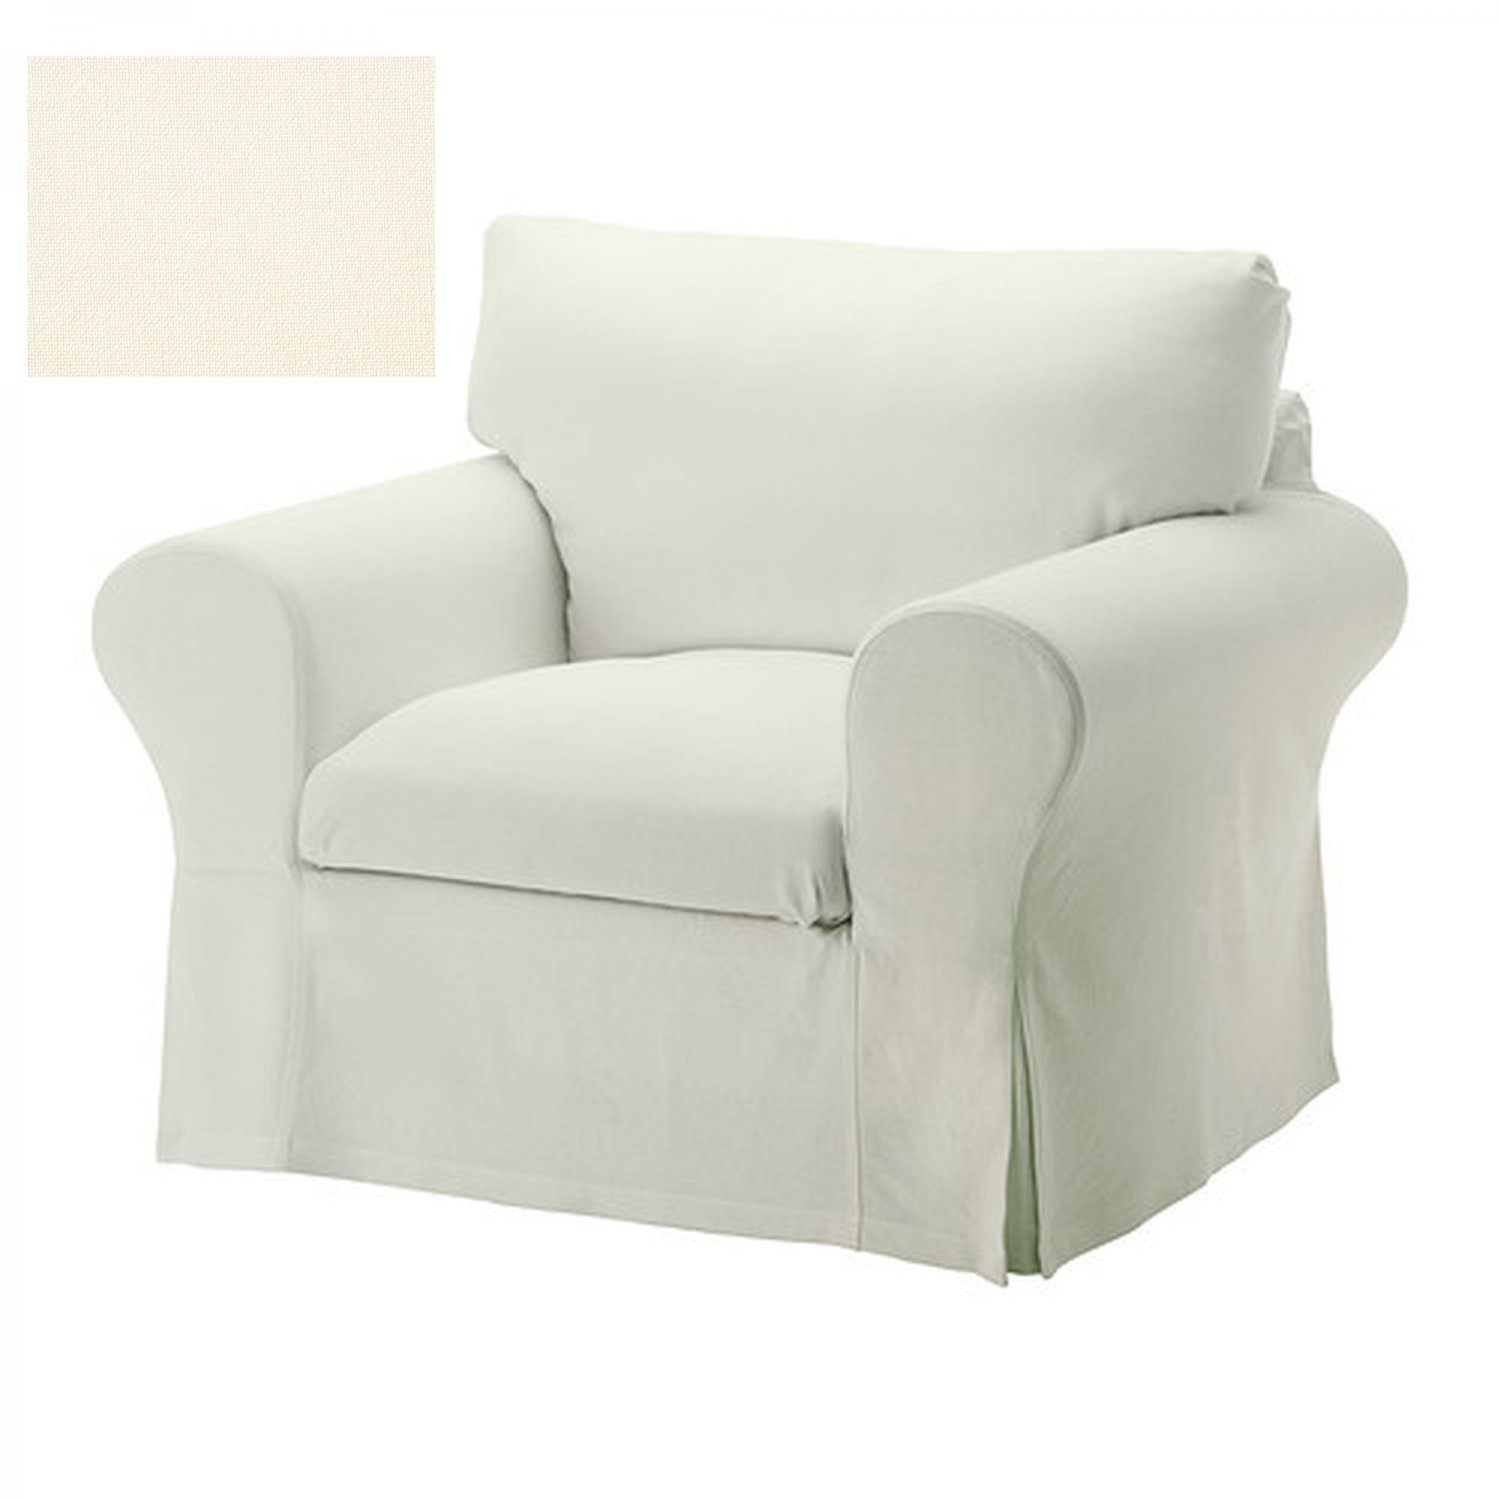  Recliner Chair Covers Ikea with Simple Decor